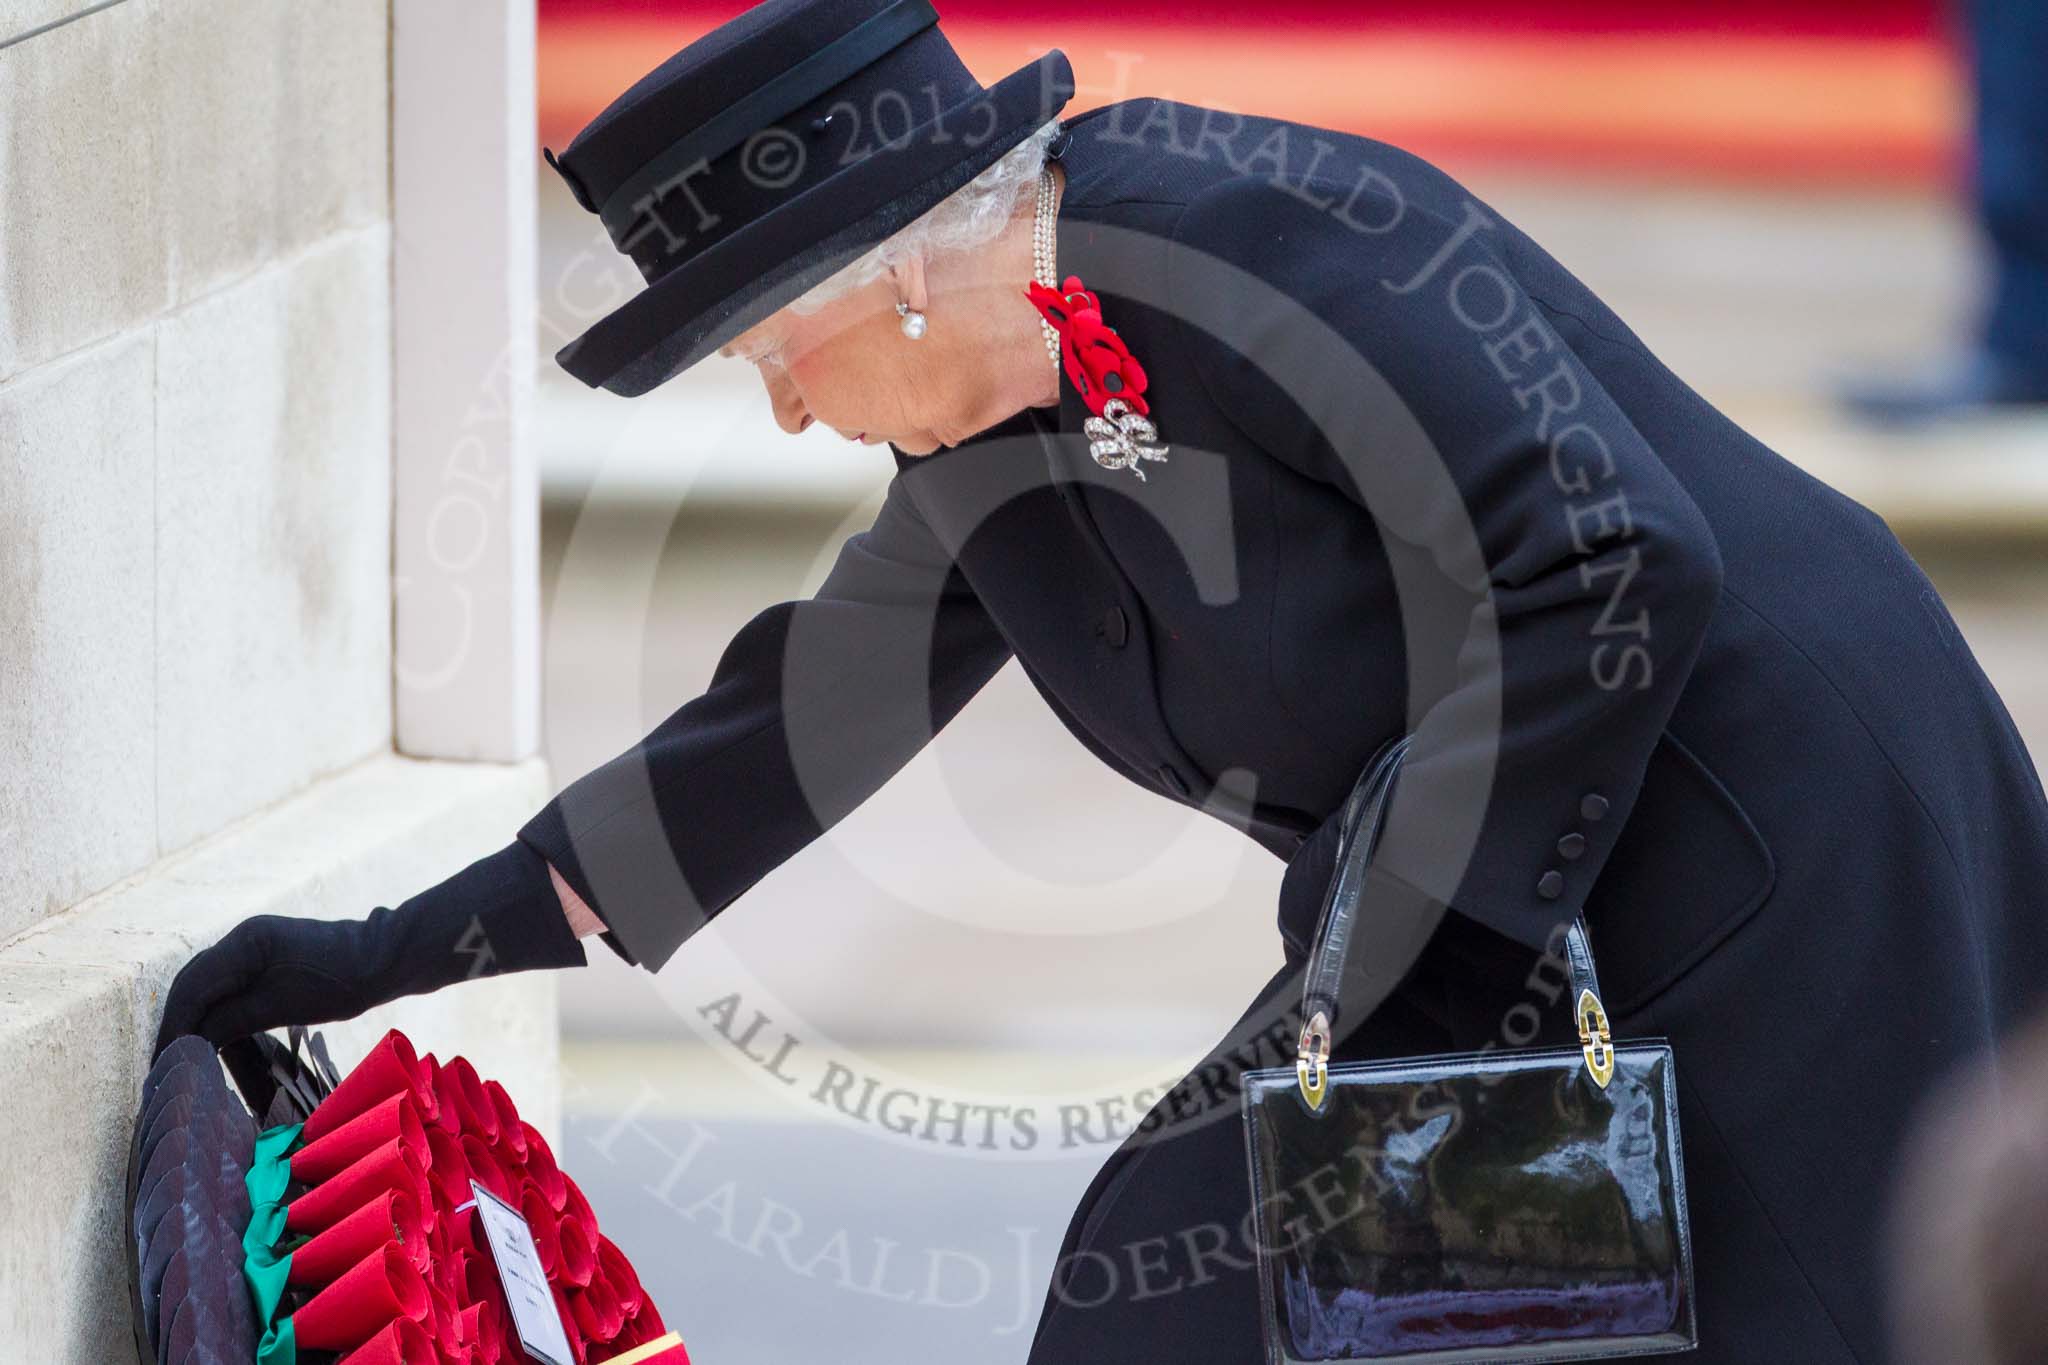 Remembrance Sunday at the Cenotaph 2015: HM The Queen at the Cenotaph, laying her wreath. Image #178, 08 November 2015 11:03 Whitehall, London, UK